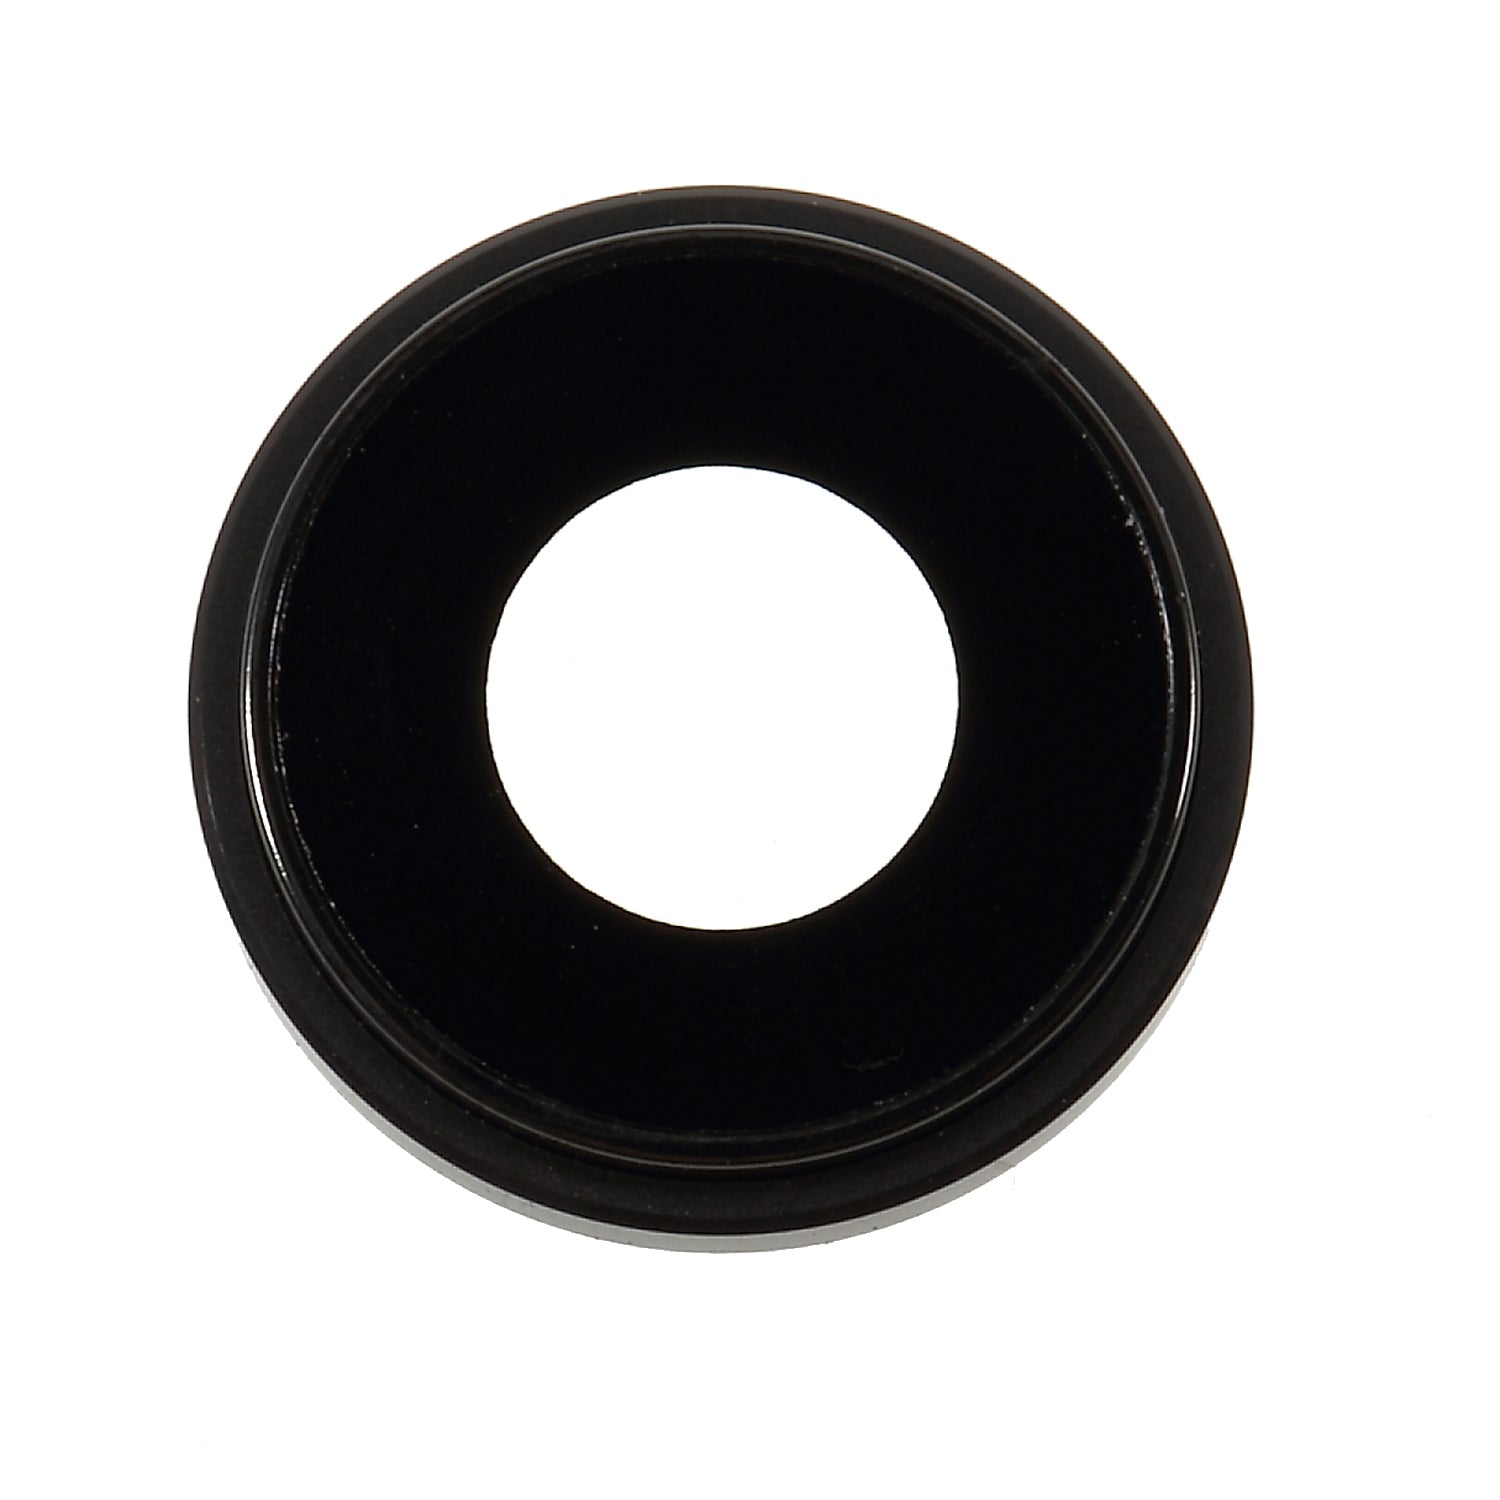 Rear Camera Lens Ring Cover with Glass Lens for iPhone XR 6.1 inch - Black